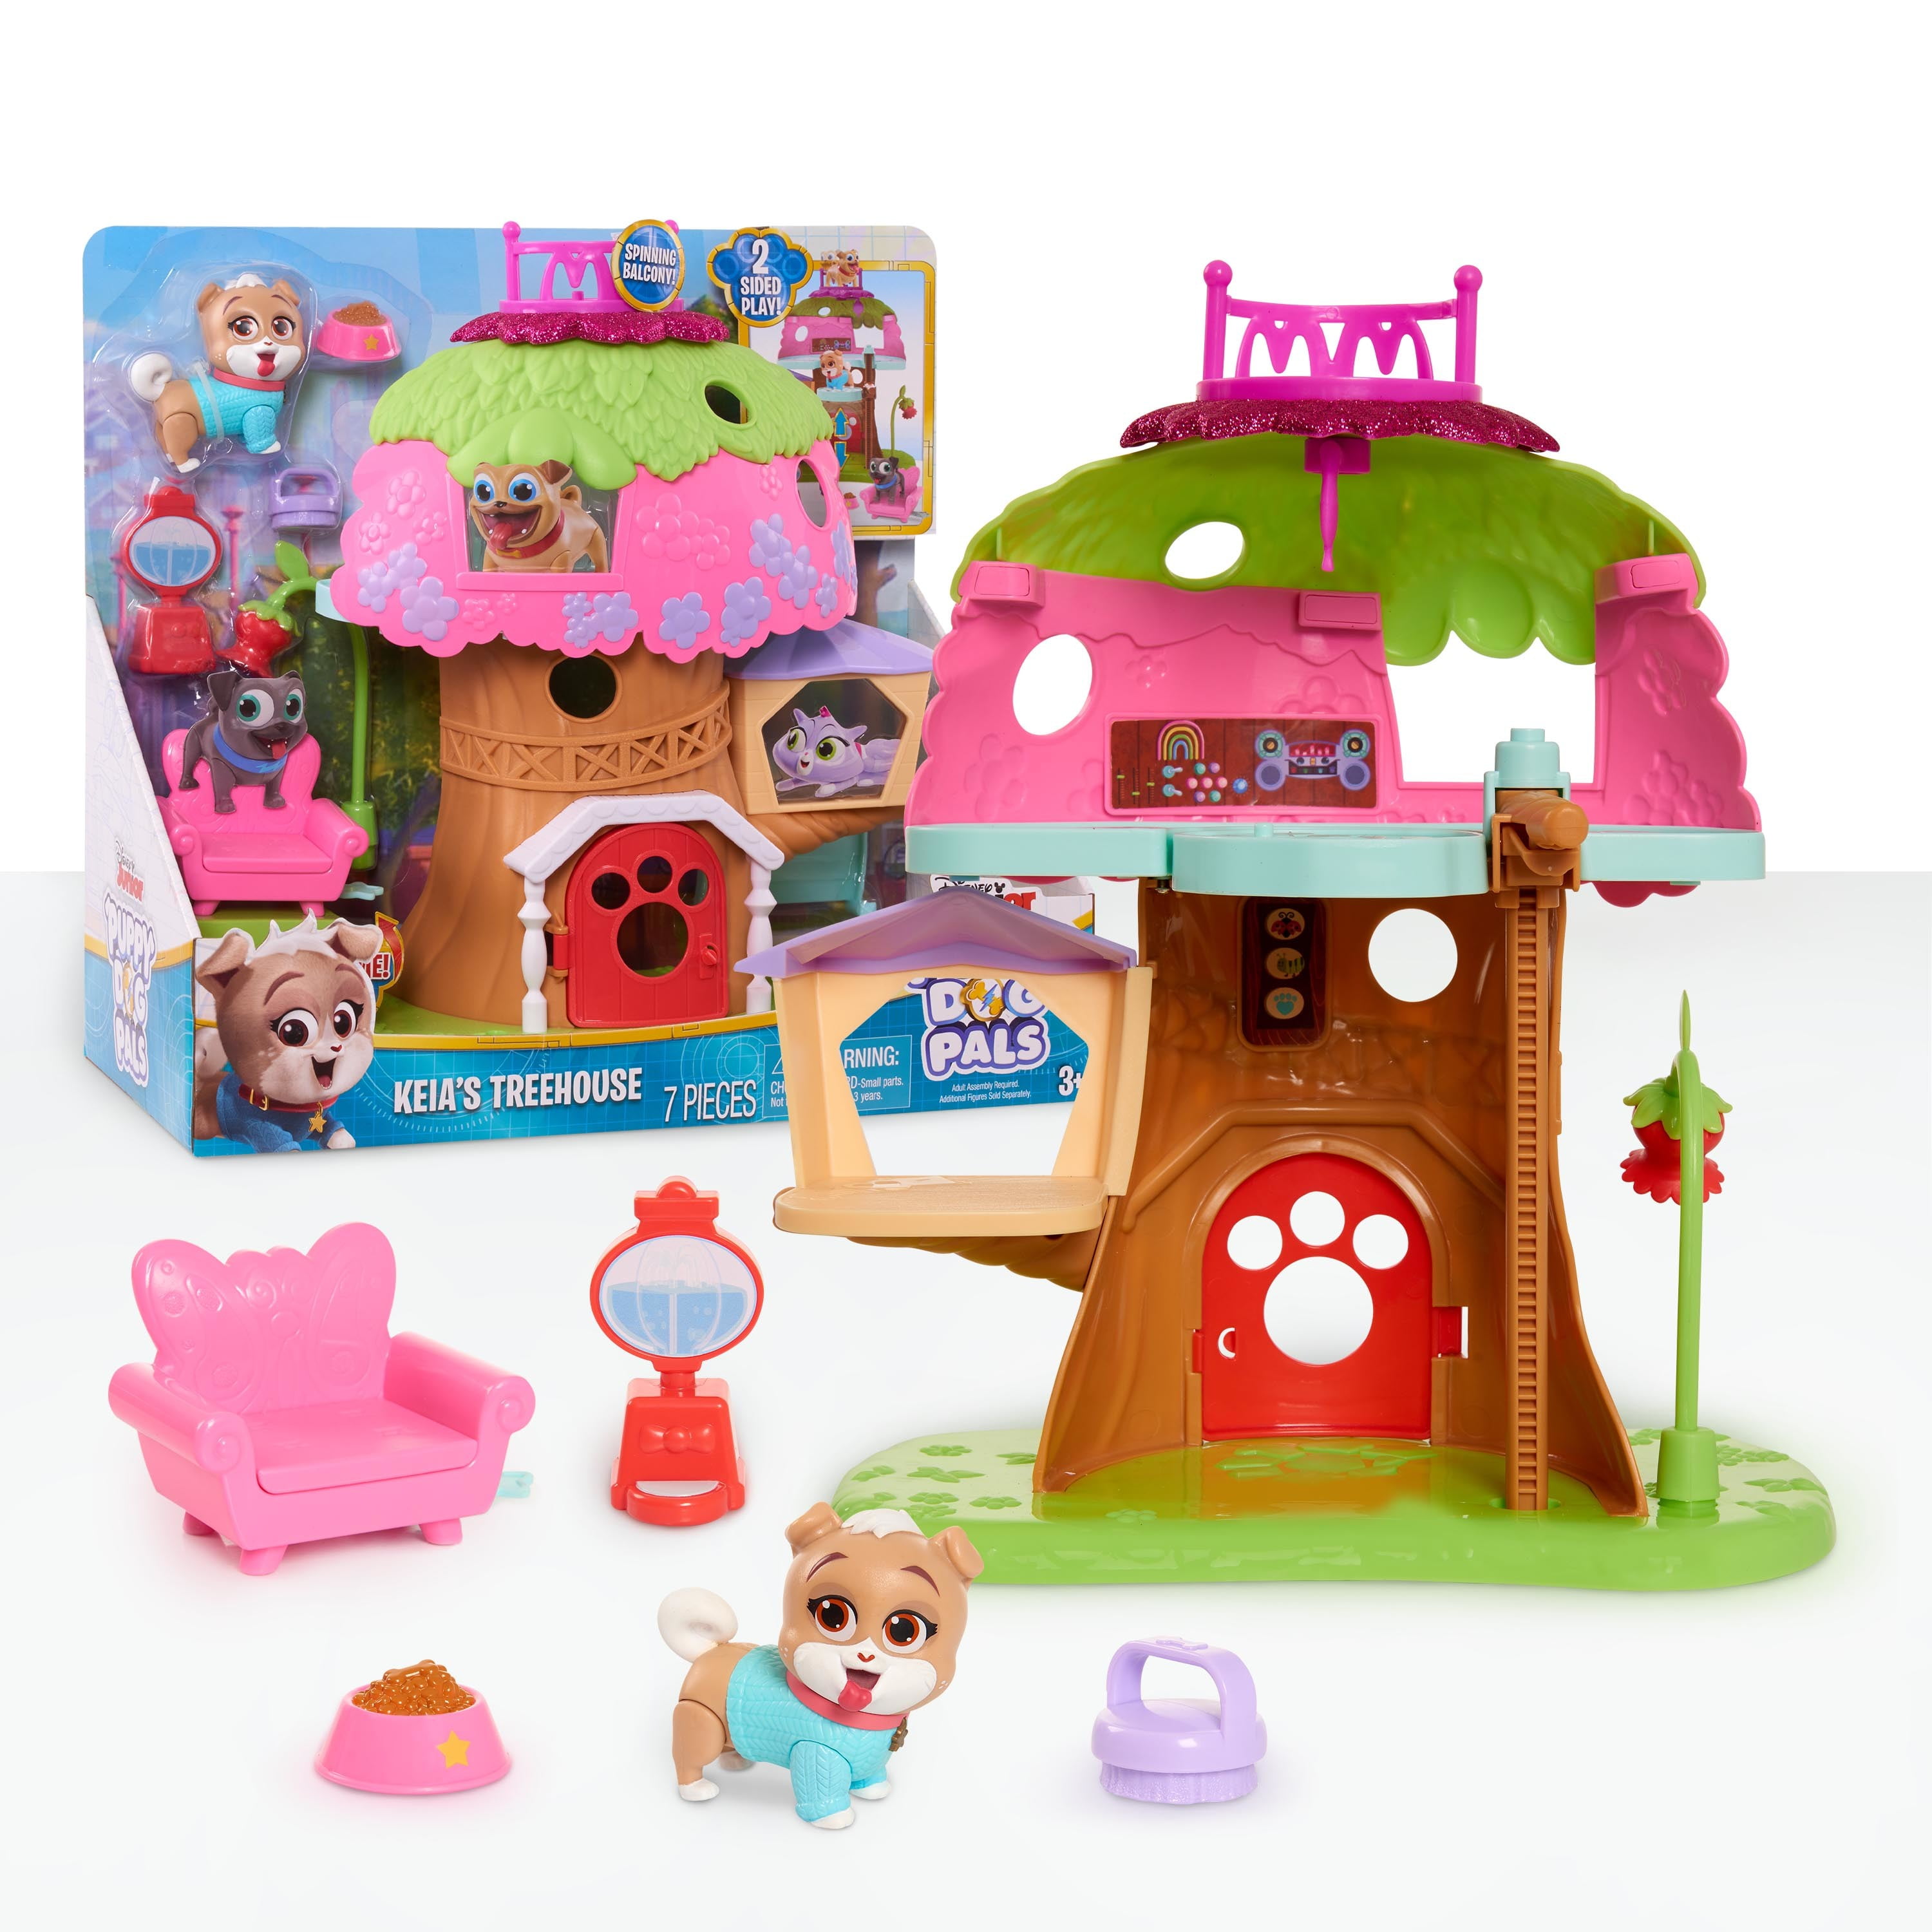 Puppy Dog Pals House Playset Child Kid Toy Doghouse Gift Pretend Just Play 